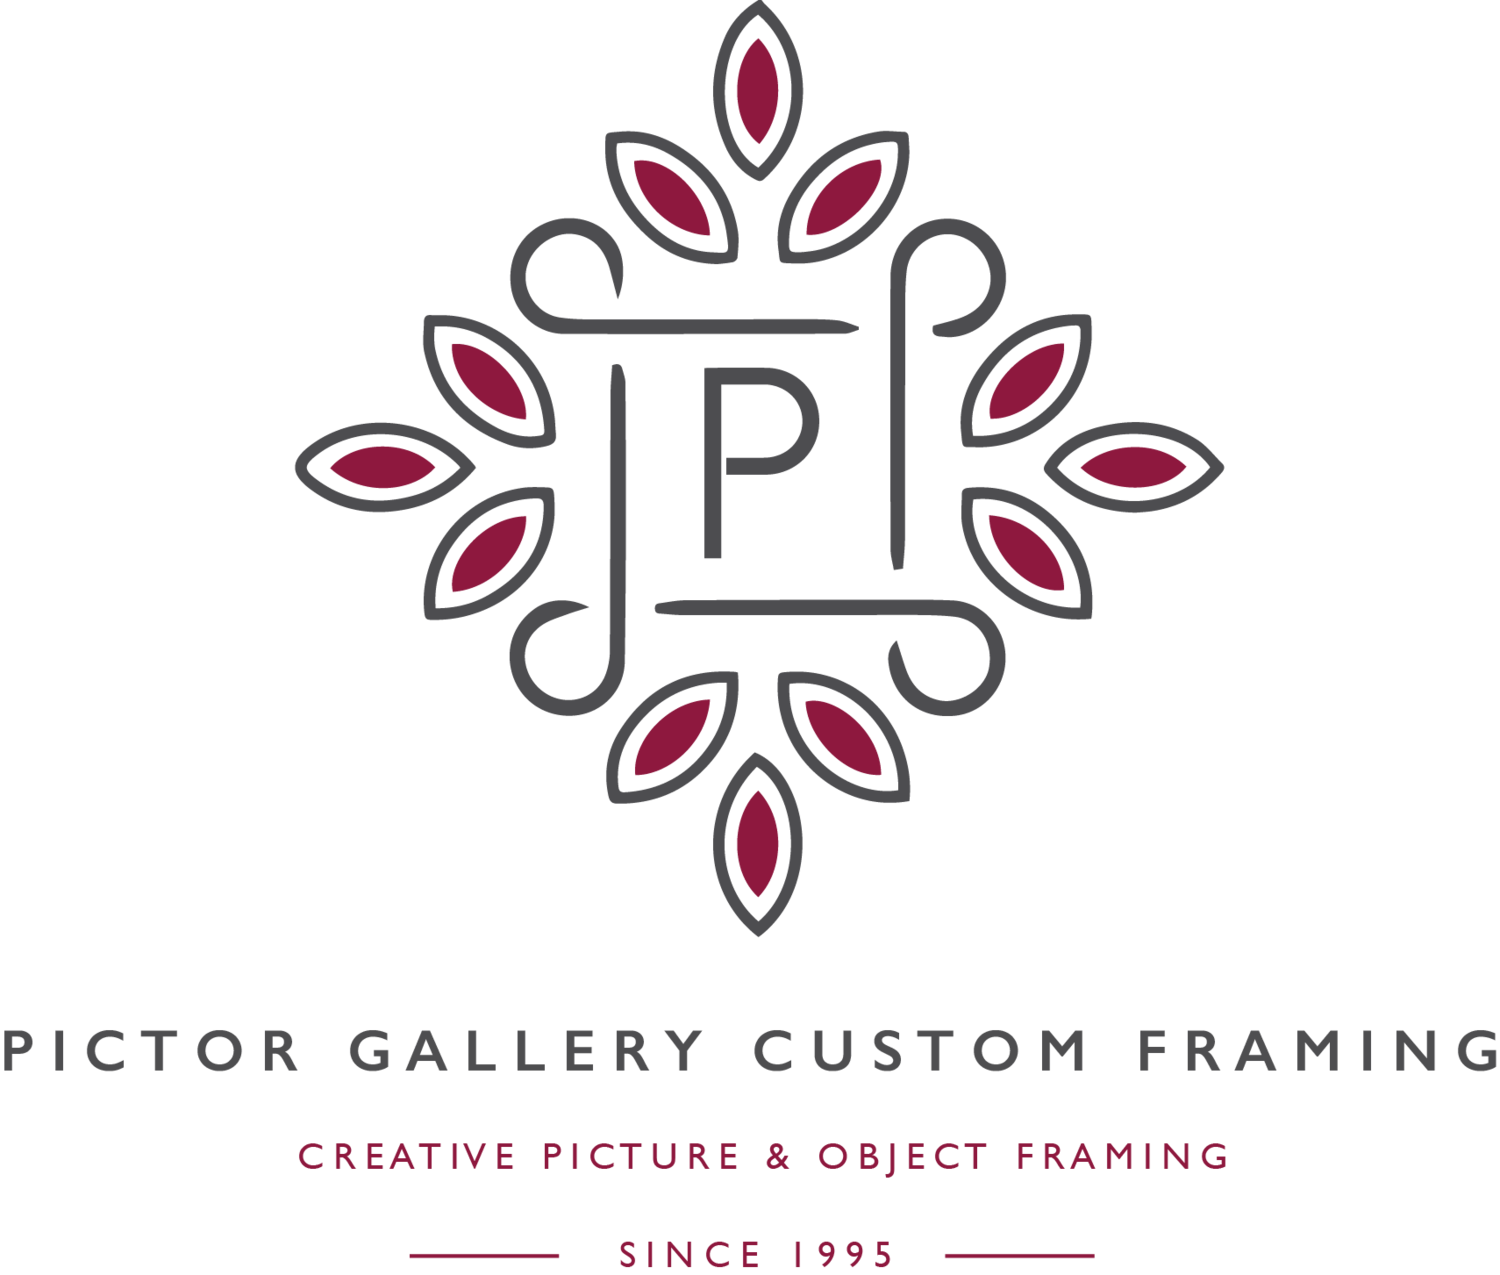 PICTOR GALLERY